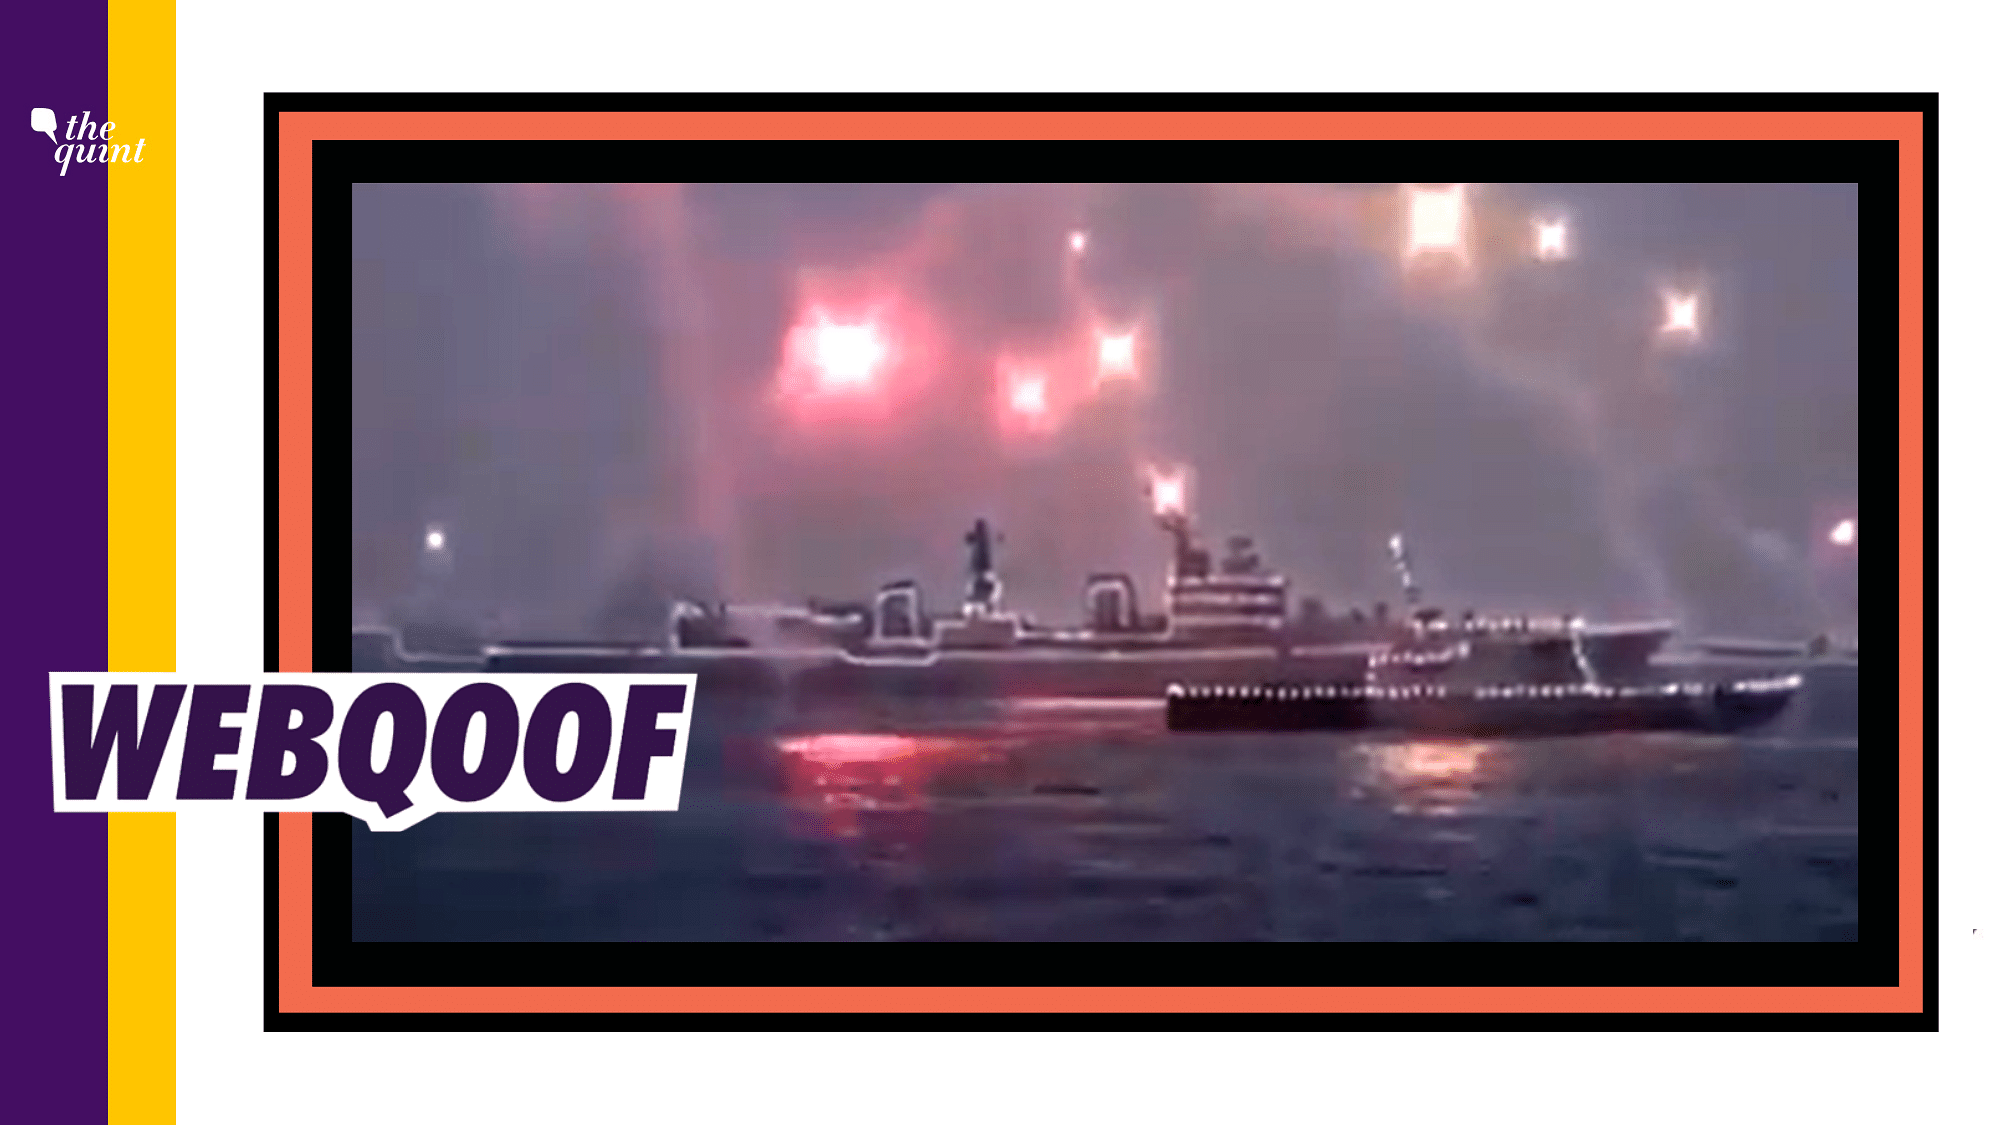 Fact-Check on India Navy Diwali Celebrations: The Illuminated warships and fireworks were part of the International Fleet Review that took place in 2016. 